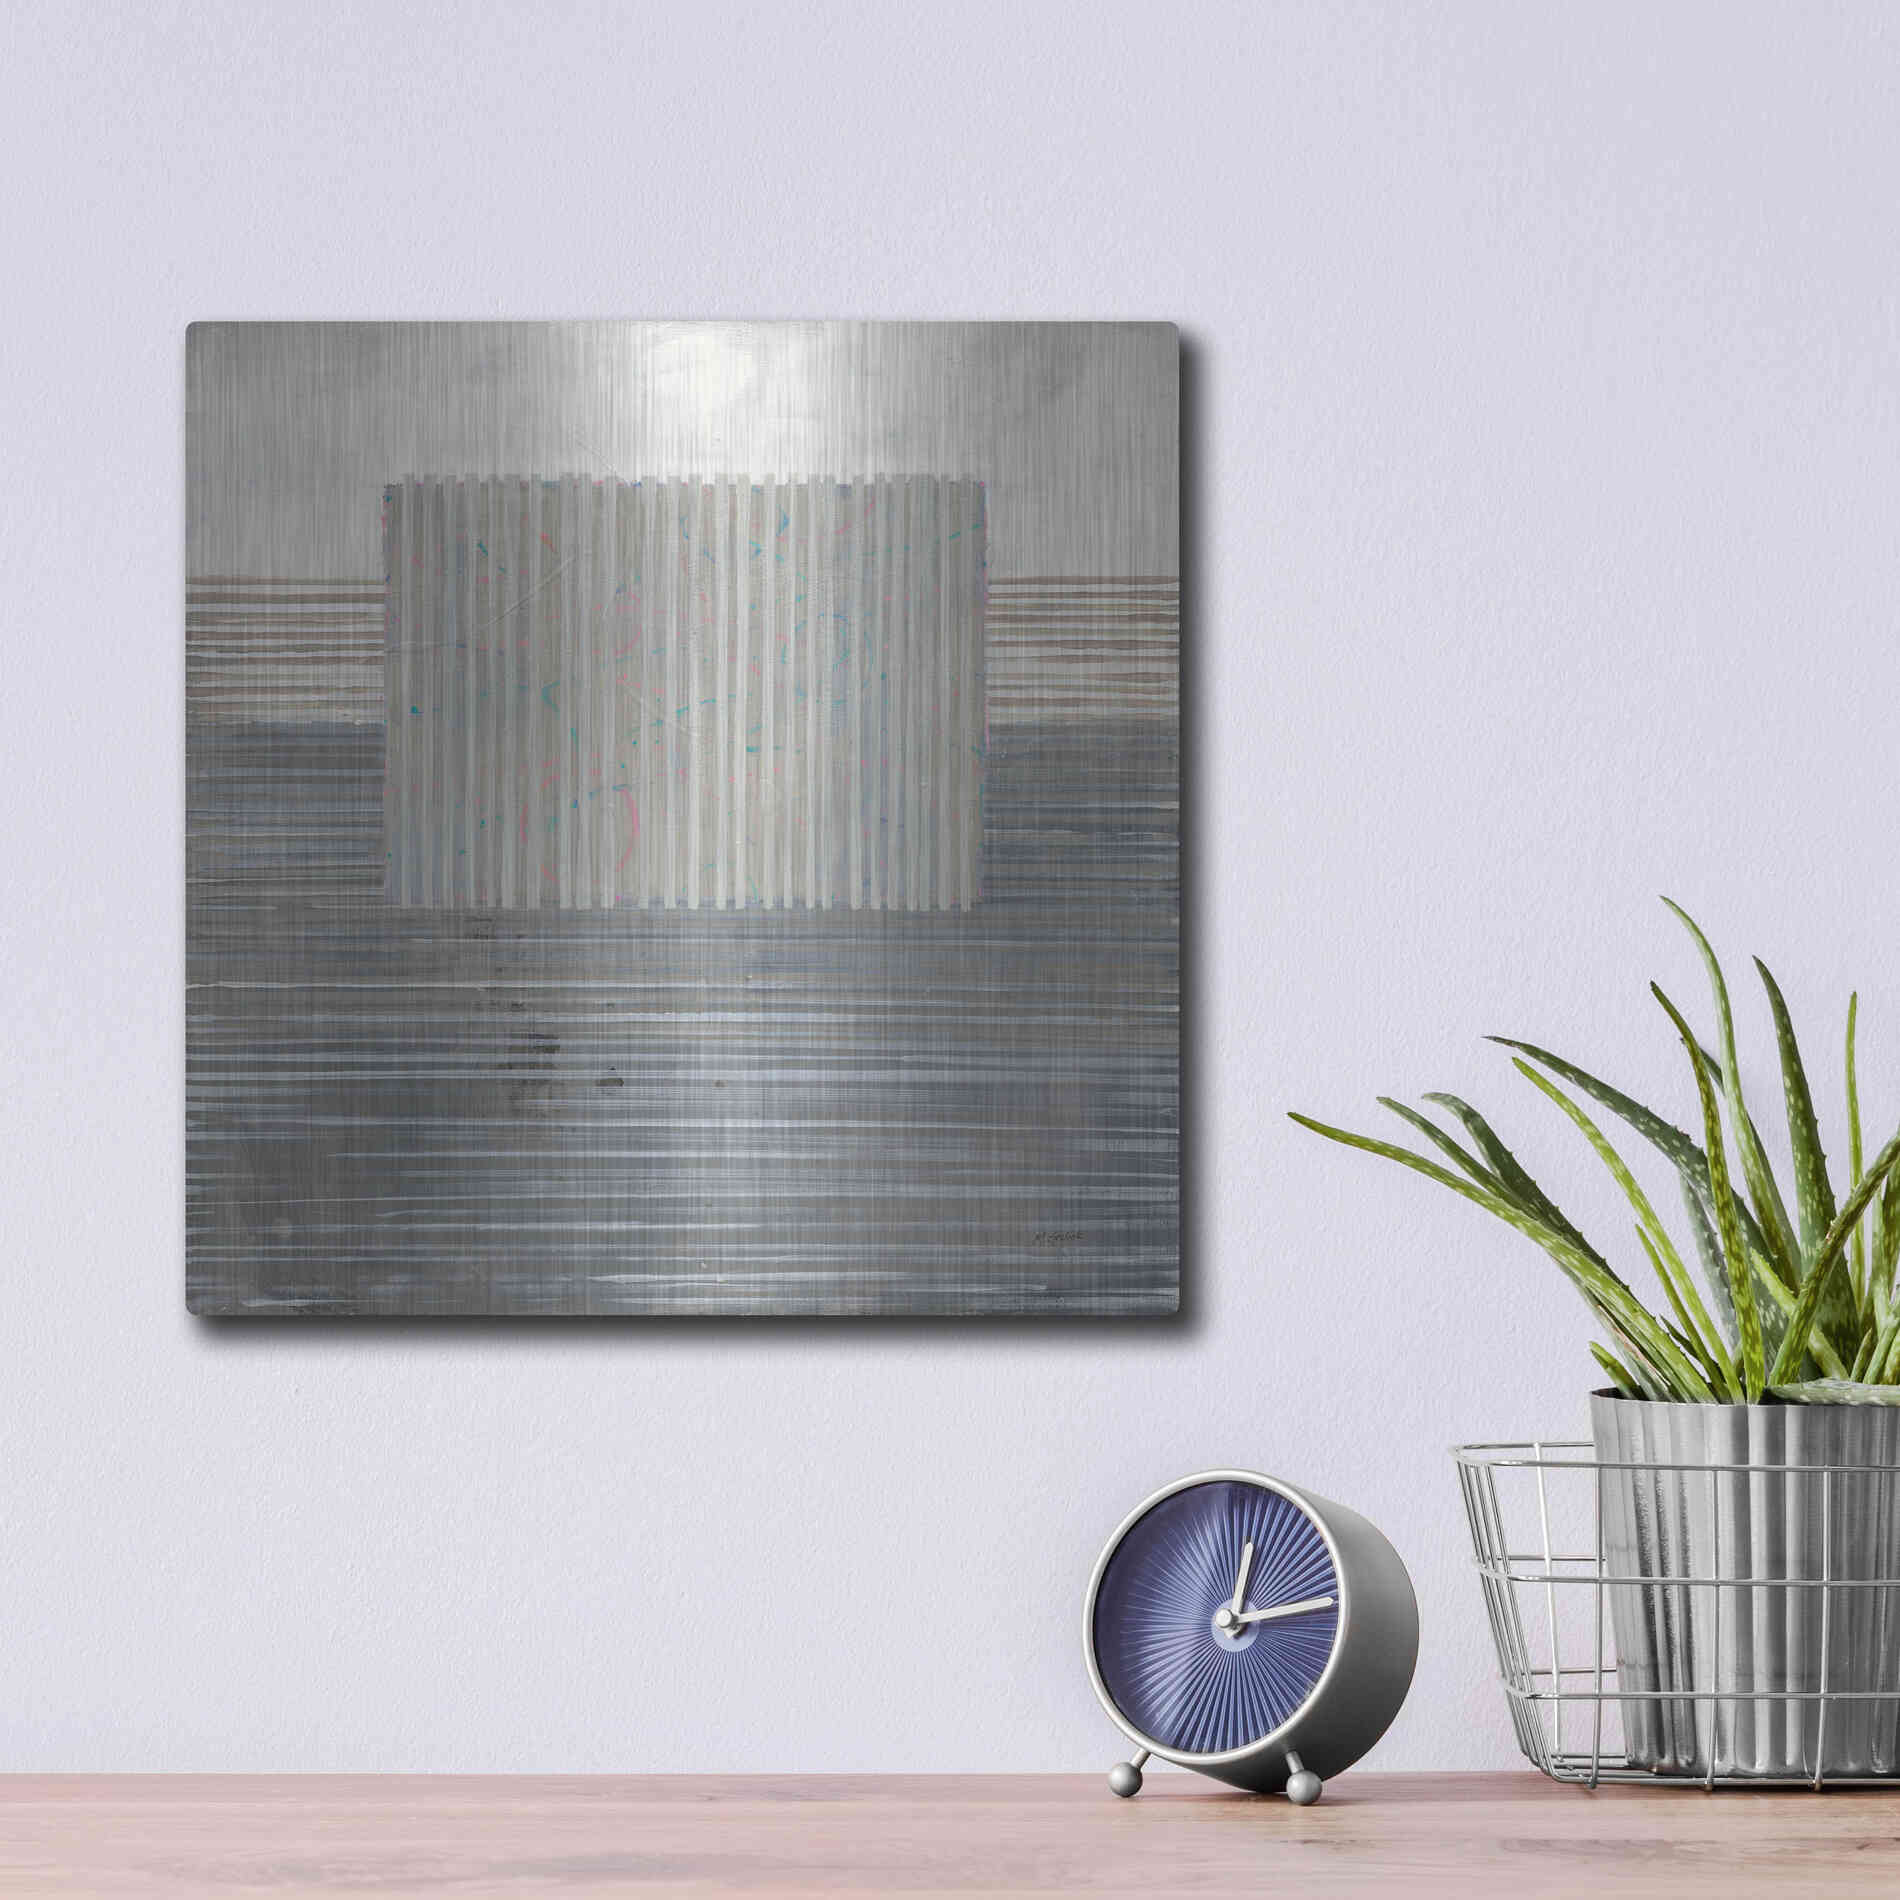 Luxe Metal Art 'Layers Of Reality' by Mike Schick, Metal Wall Art,12x12